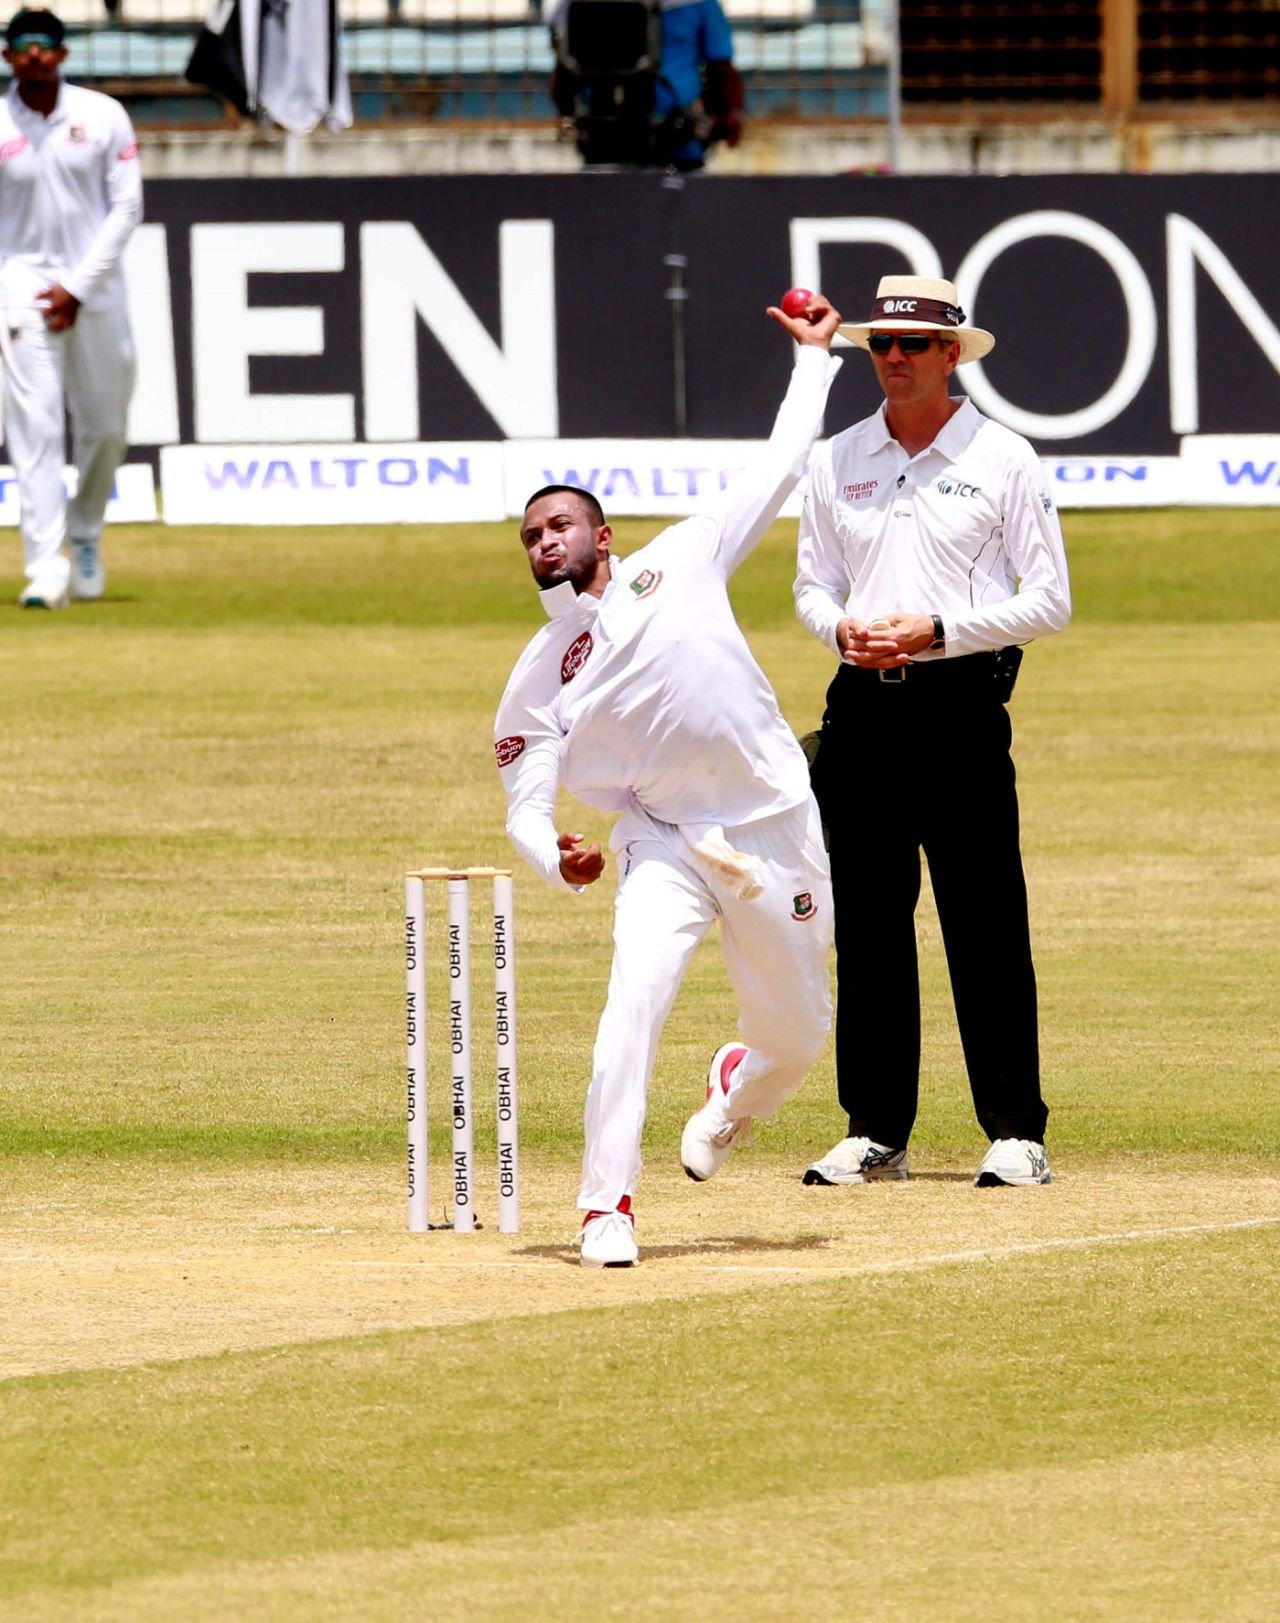 Shakib Al Hasan picked up wickets off consecutive balls in the first over of the second Afghanistan innings, Bangladesh v Afghanistan, Only Test, Chattogram, 3rd day, September 7, 2019